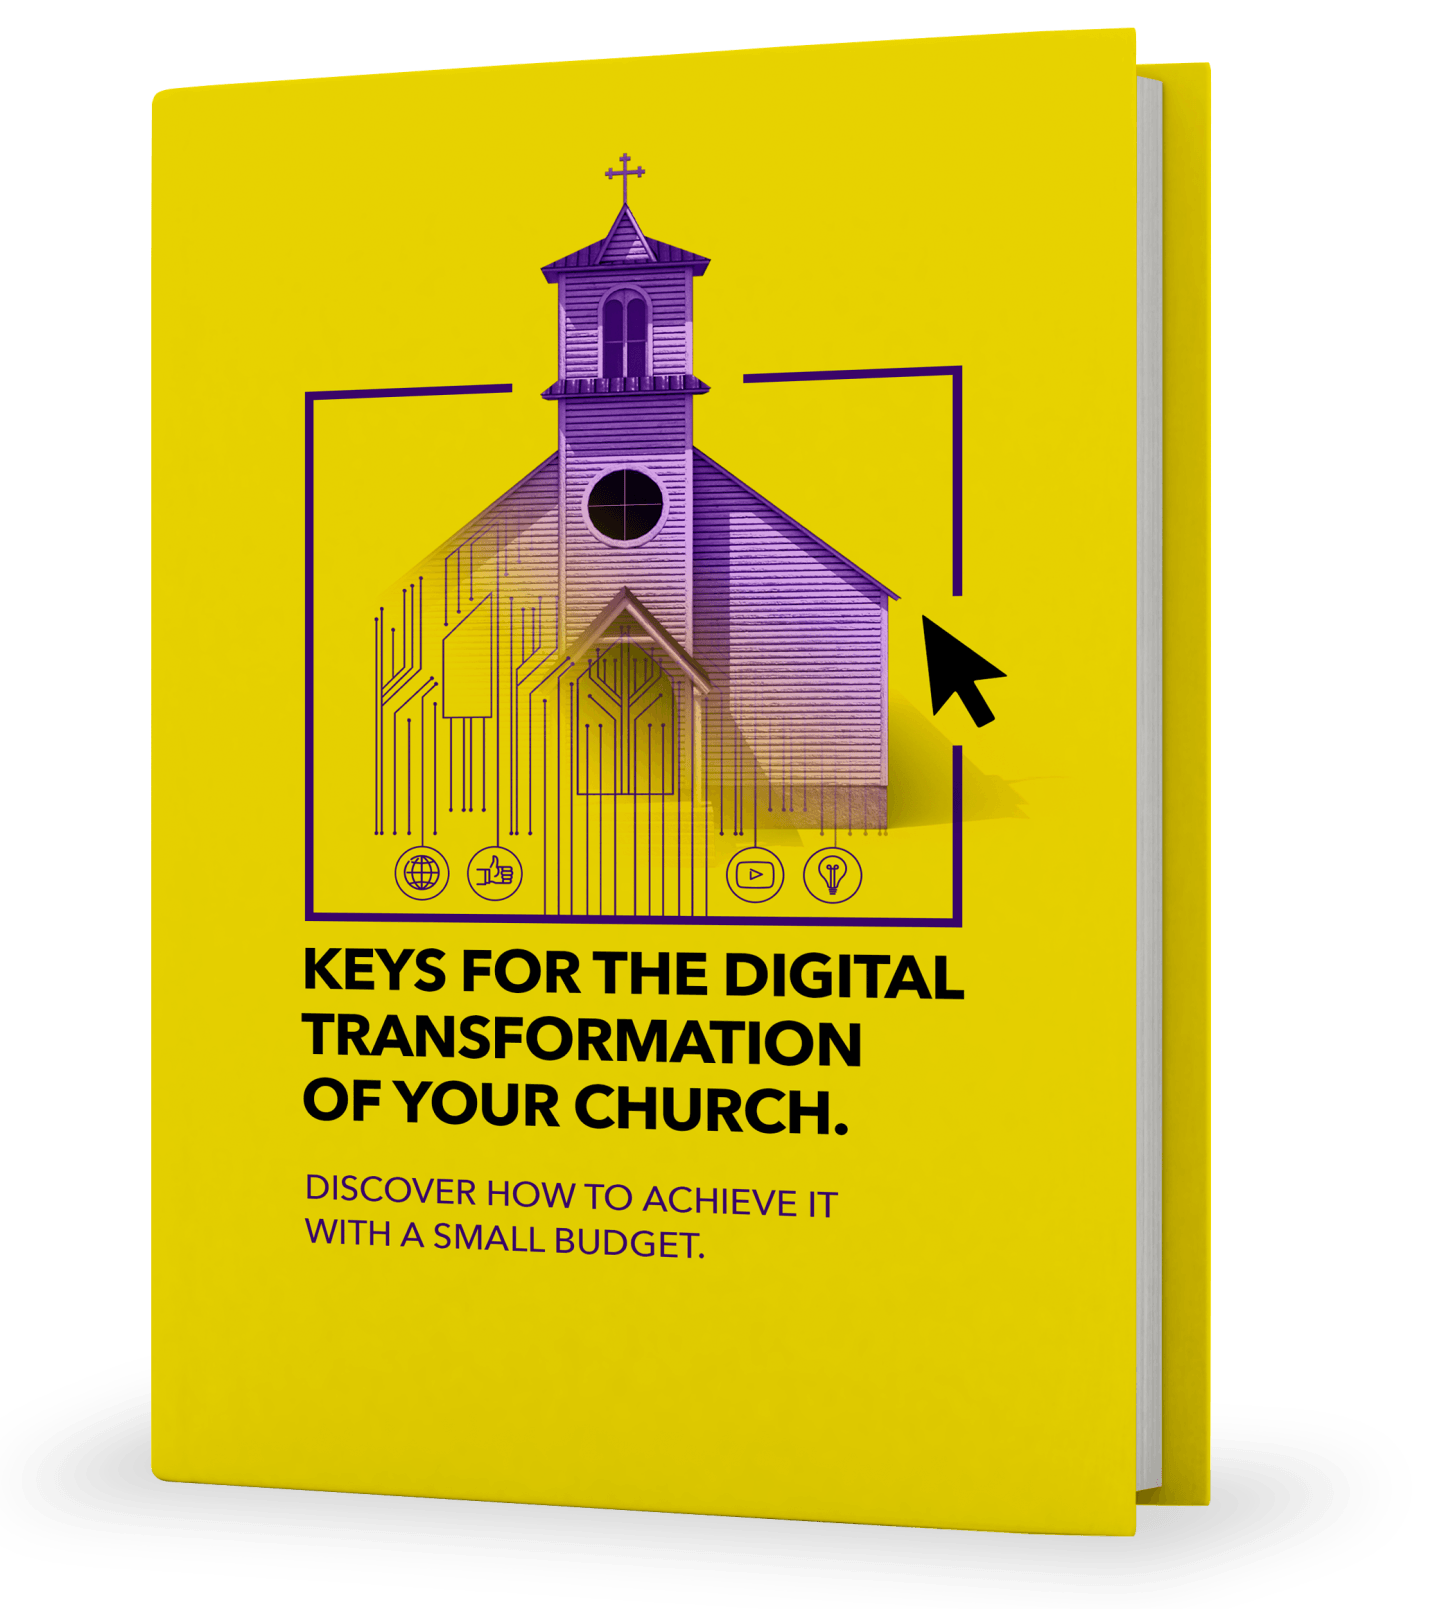 Keys for the Digital Transformation of Your Church